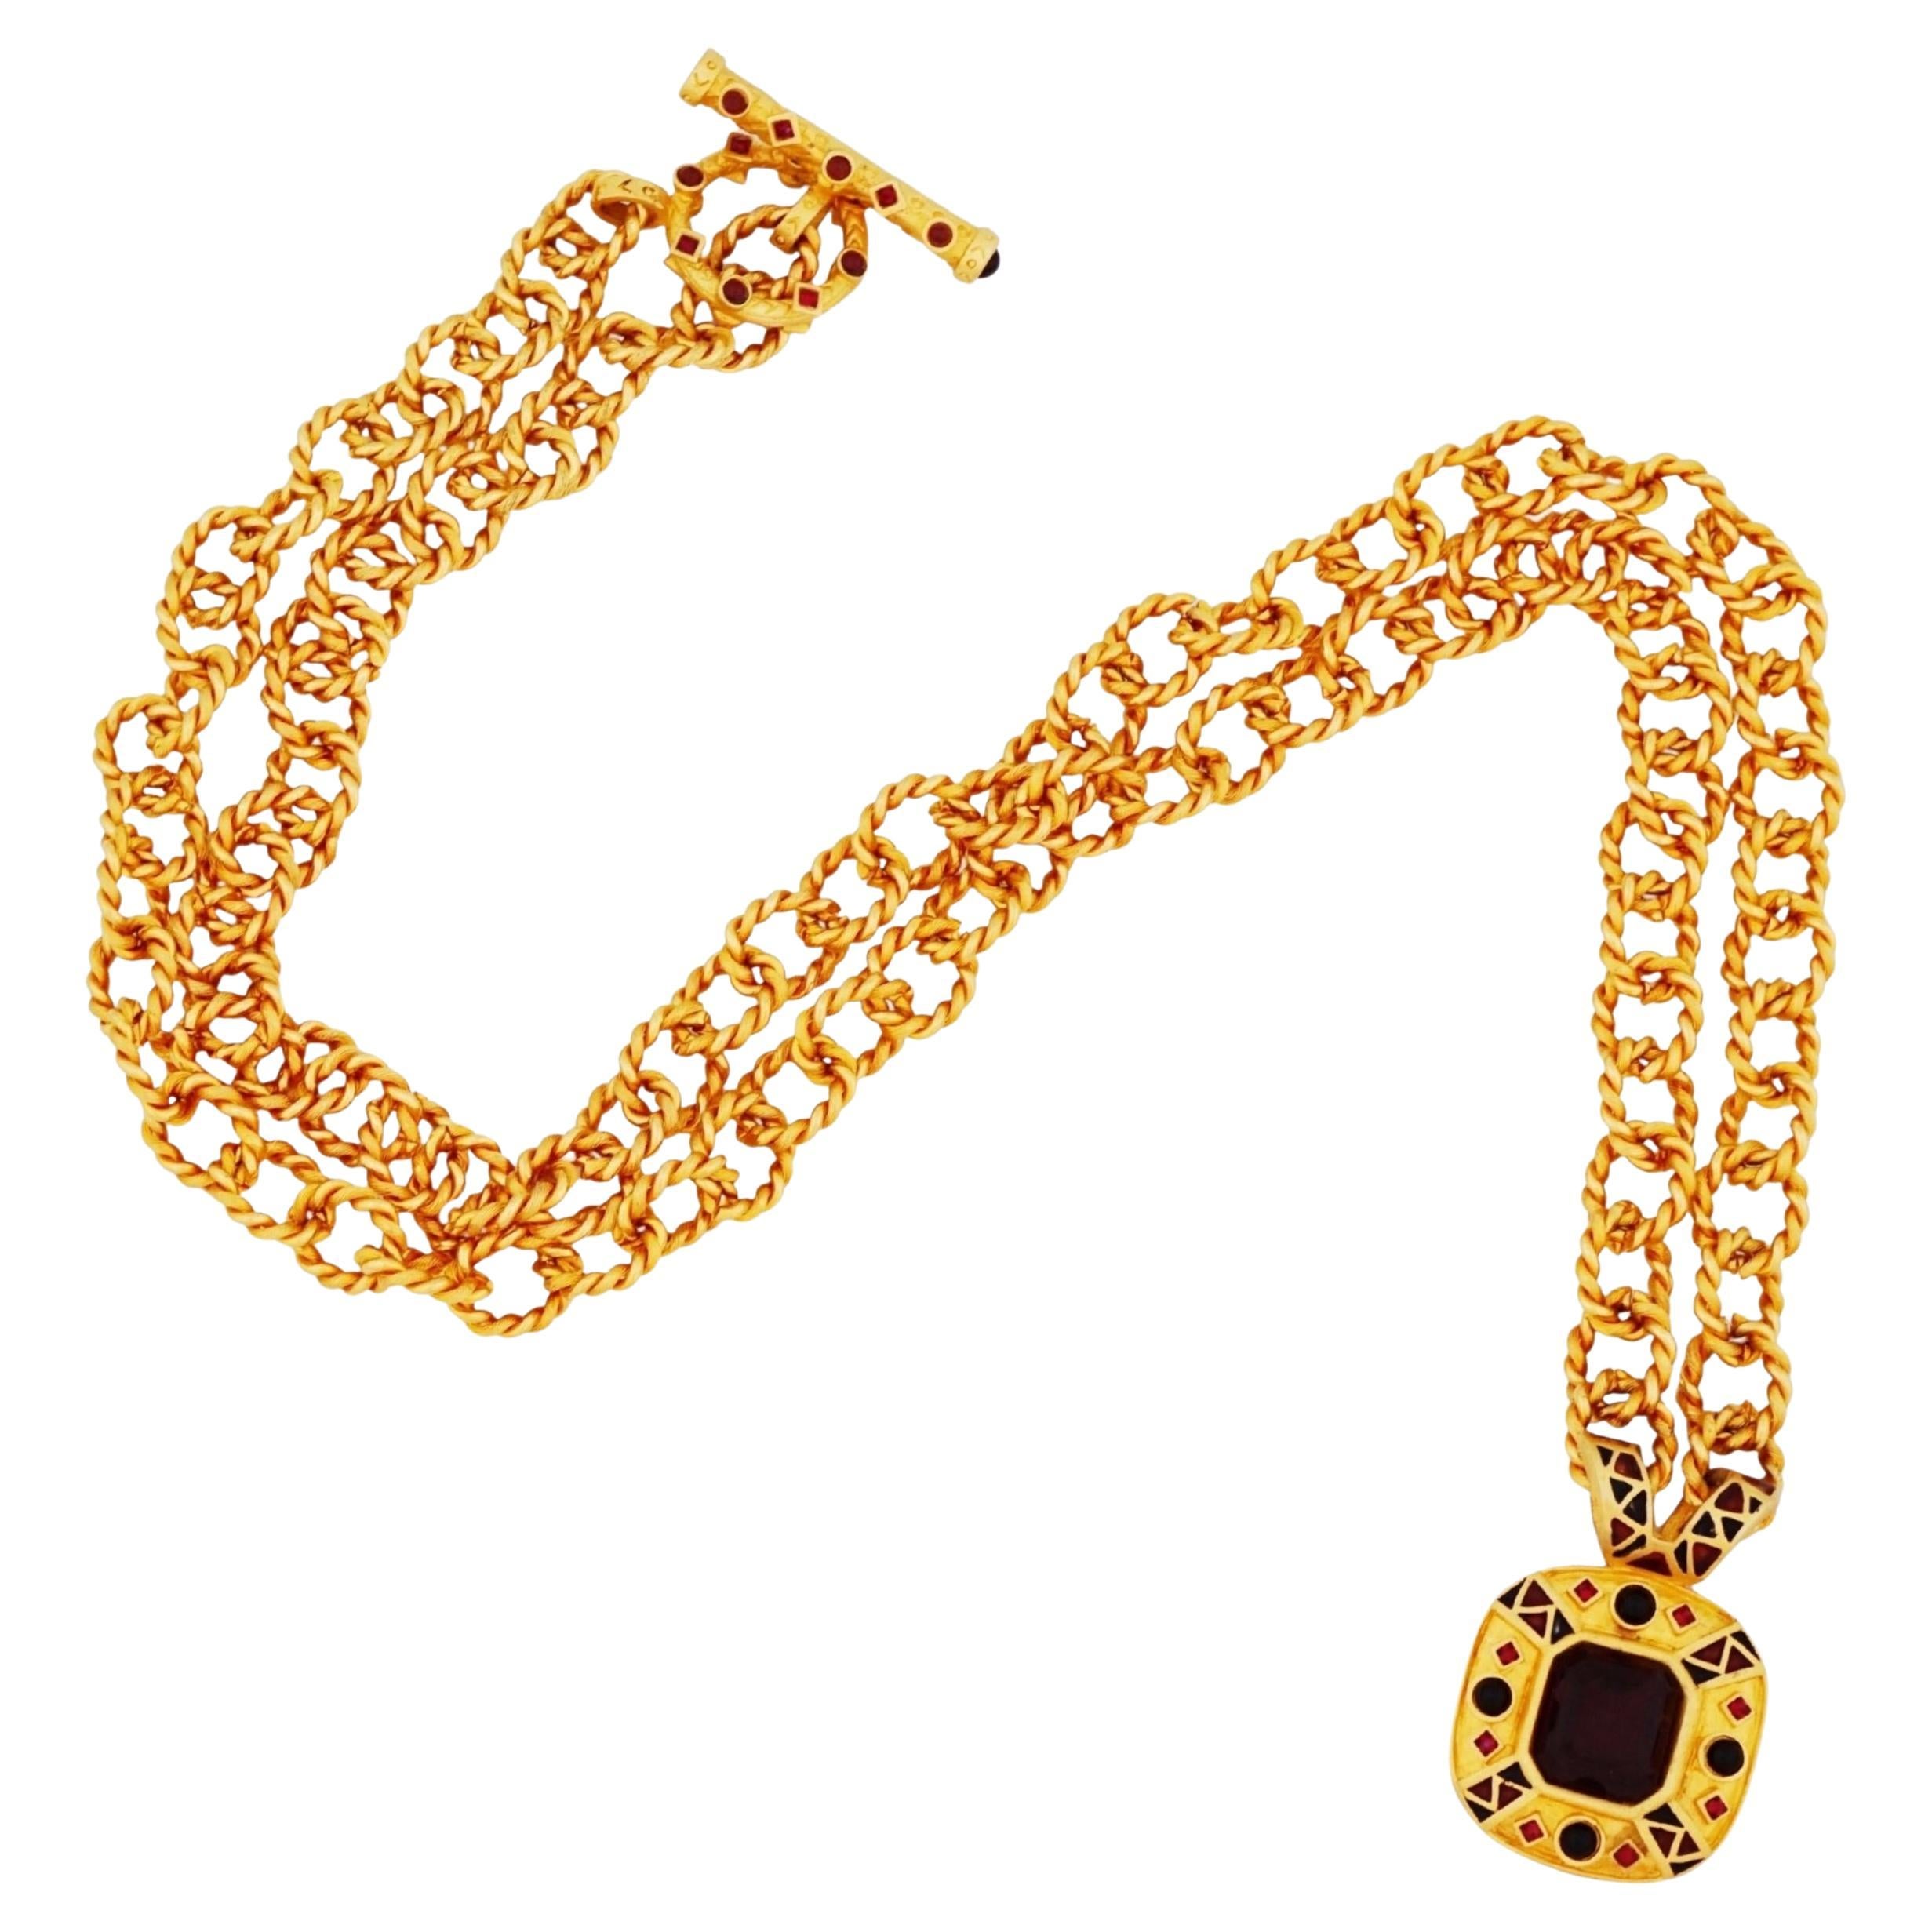 Chunky Satin Gilt Chain Necklace w/ Ruby Crystal Pendant By Leslie Block, 1980s For Sale